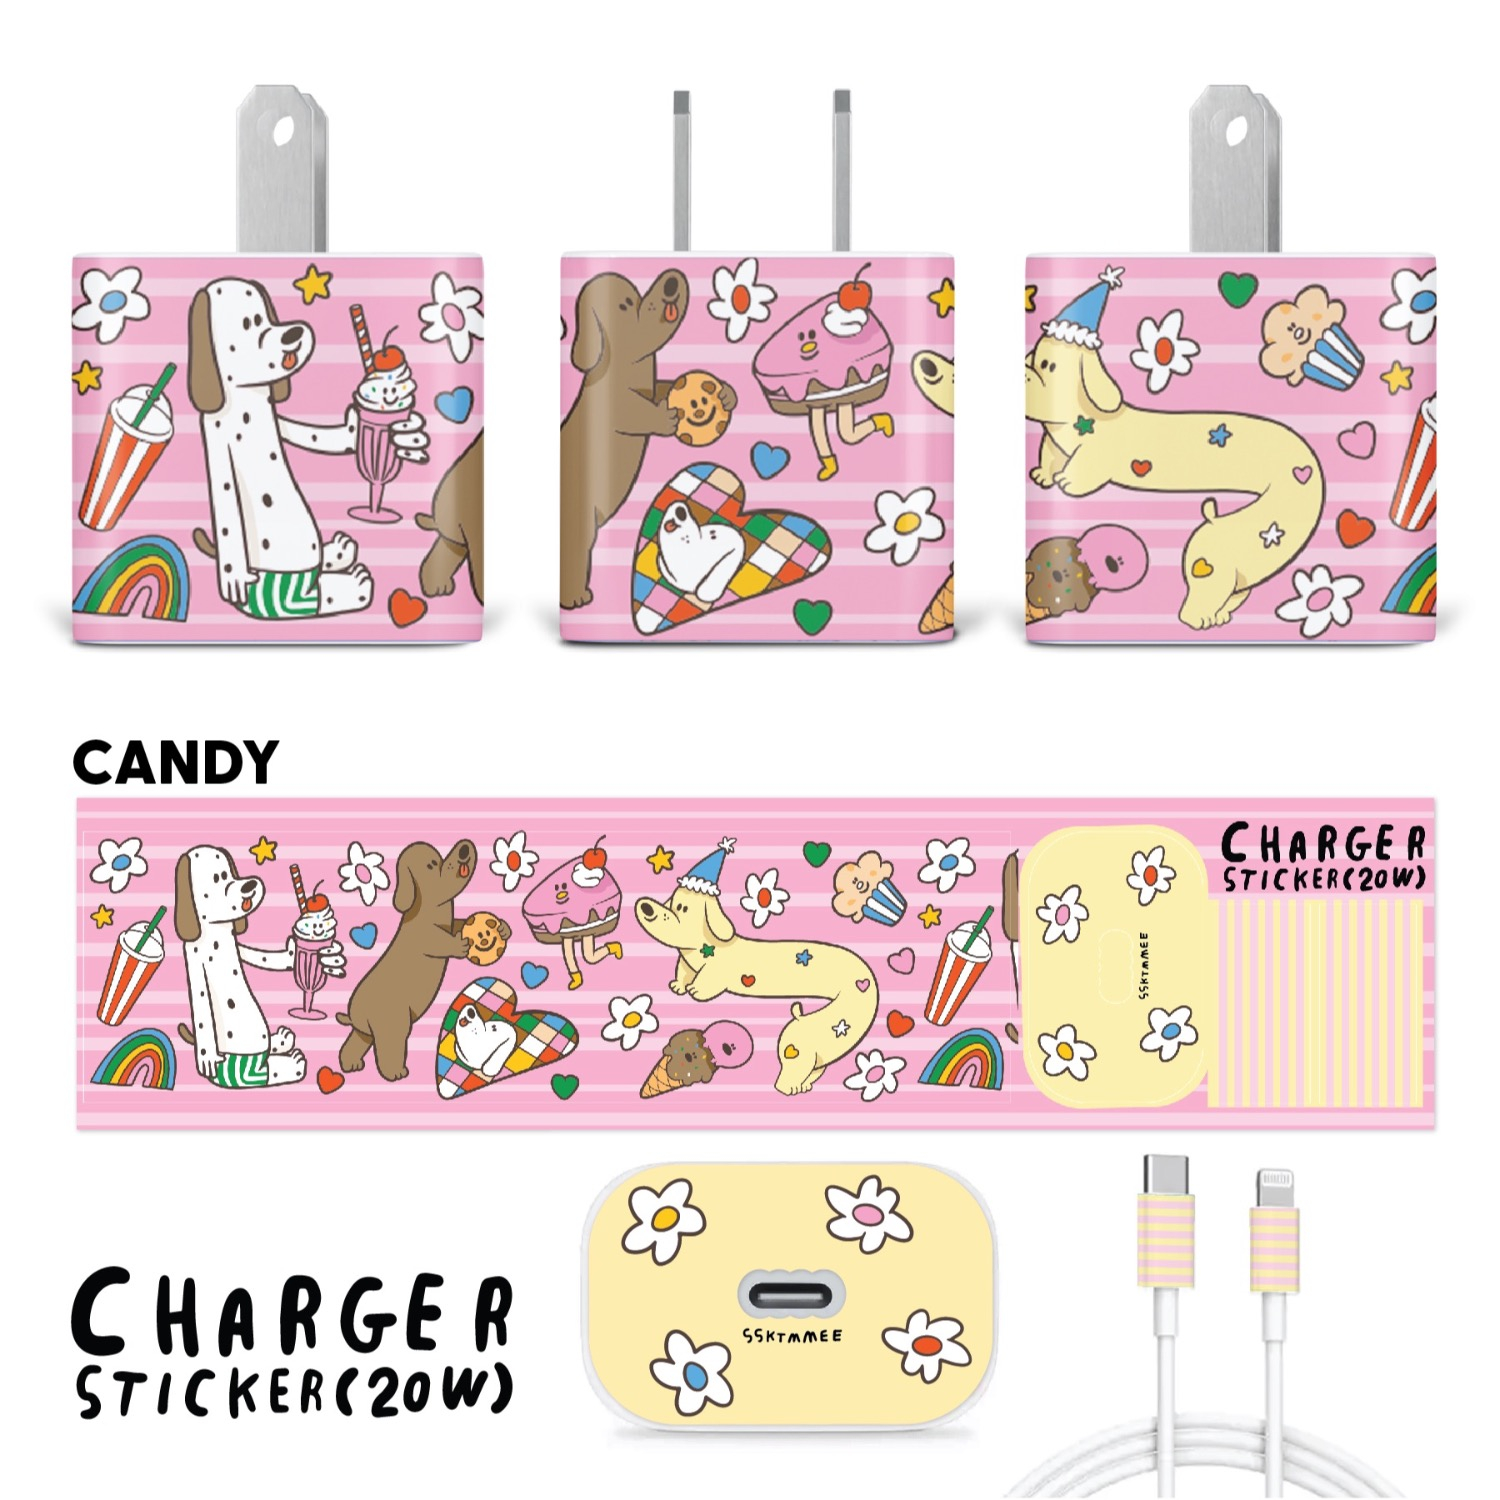 Charger Sticker - Candy